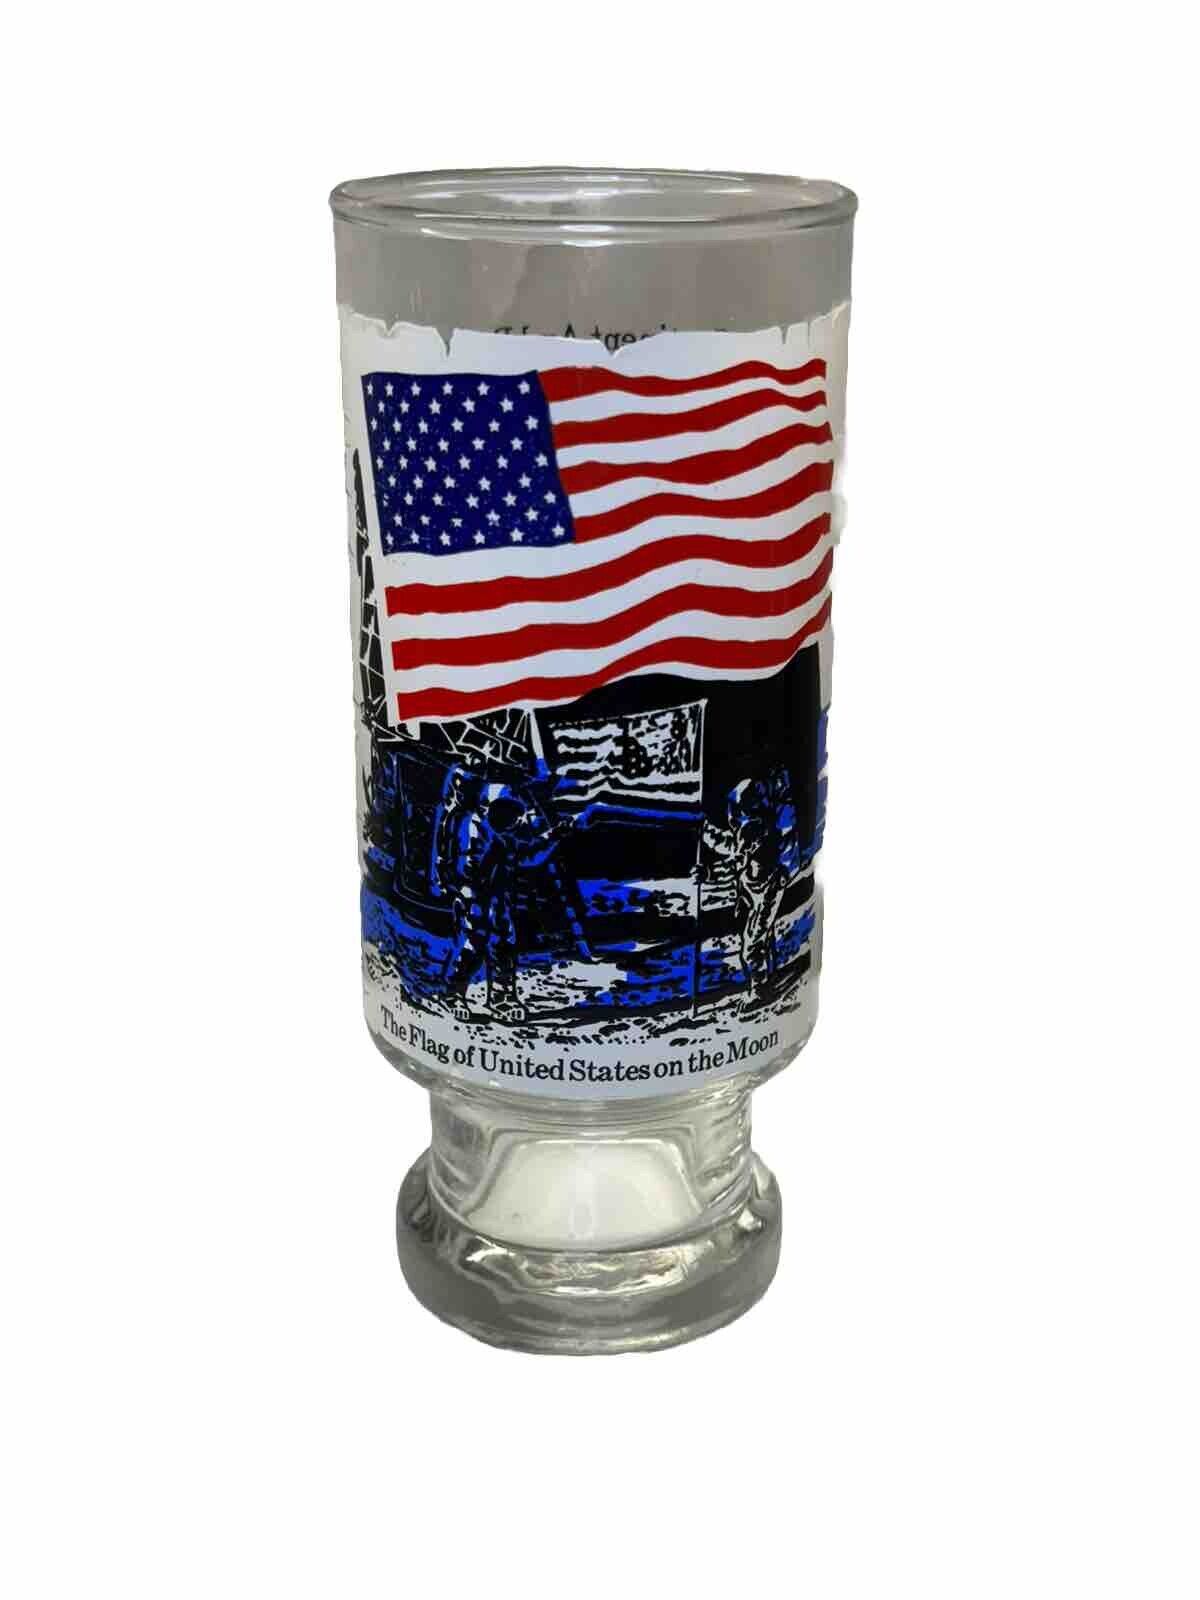 VTG USA Flag On The Moon w/ Neil Armstrong Flags of Our National Bar Glass Cup